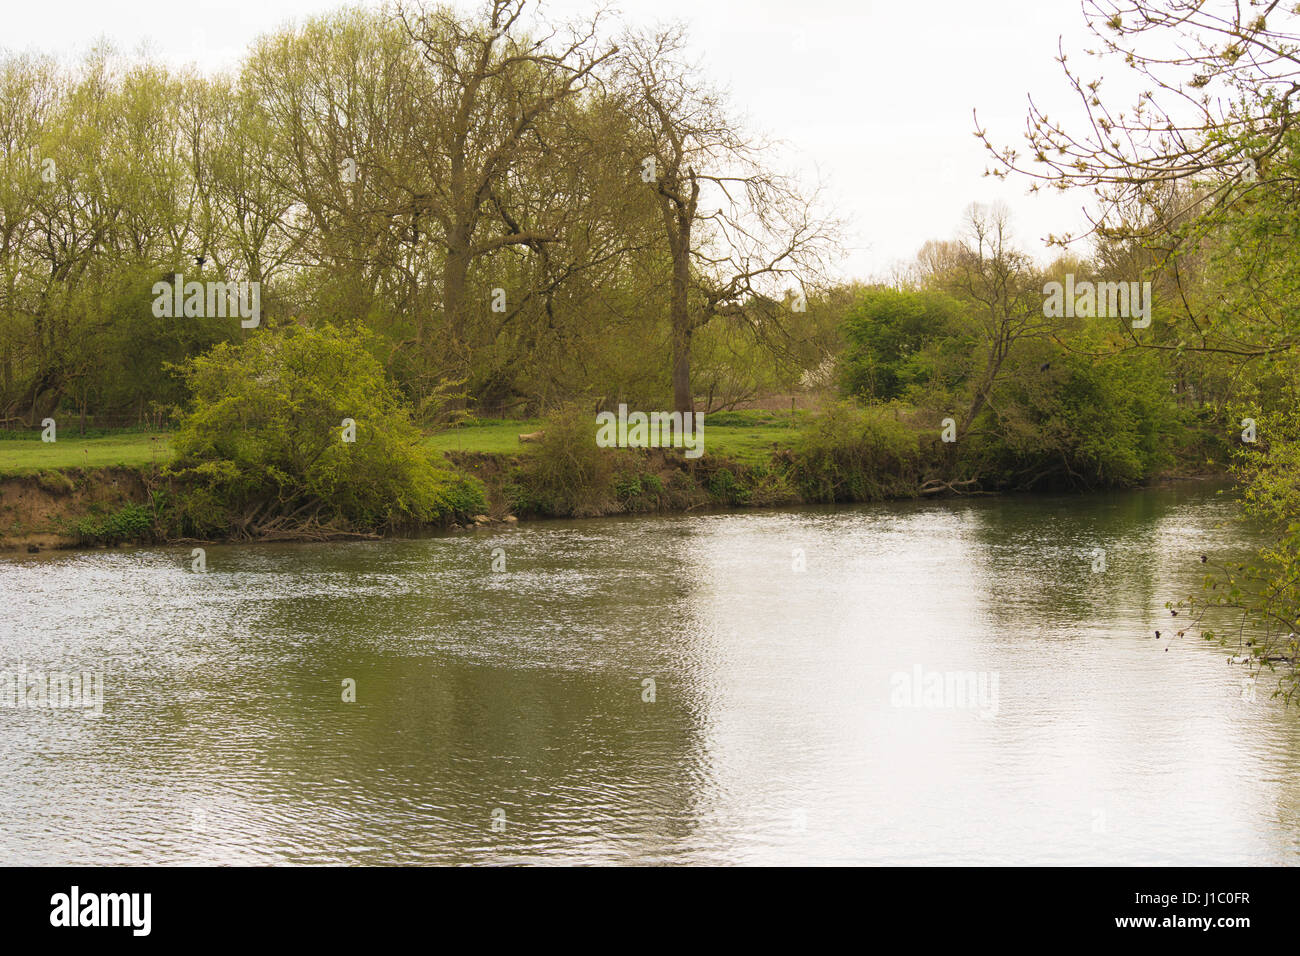 Thames River, Wallingford in Oxfordshire, UK, 2017 Stock Photo